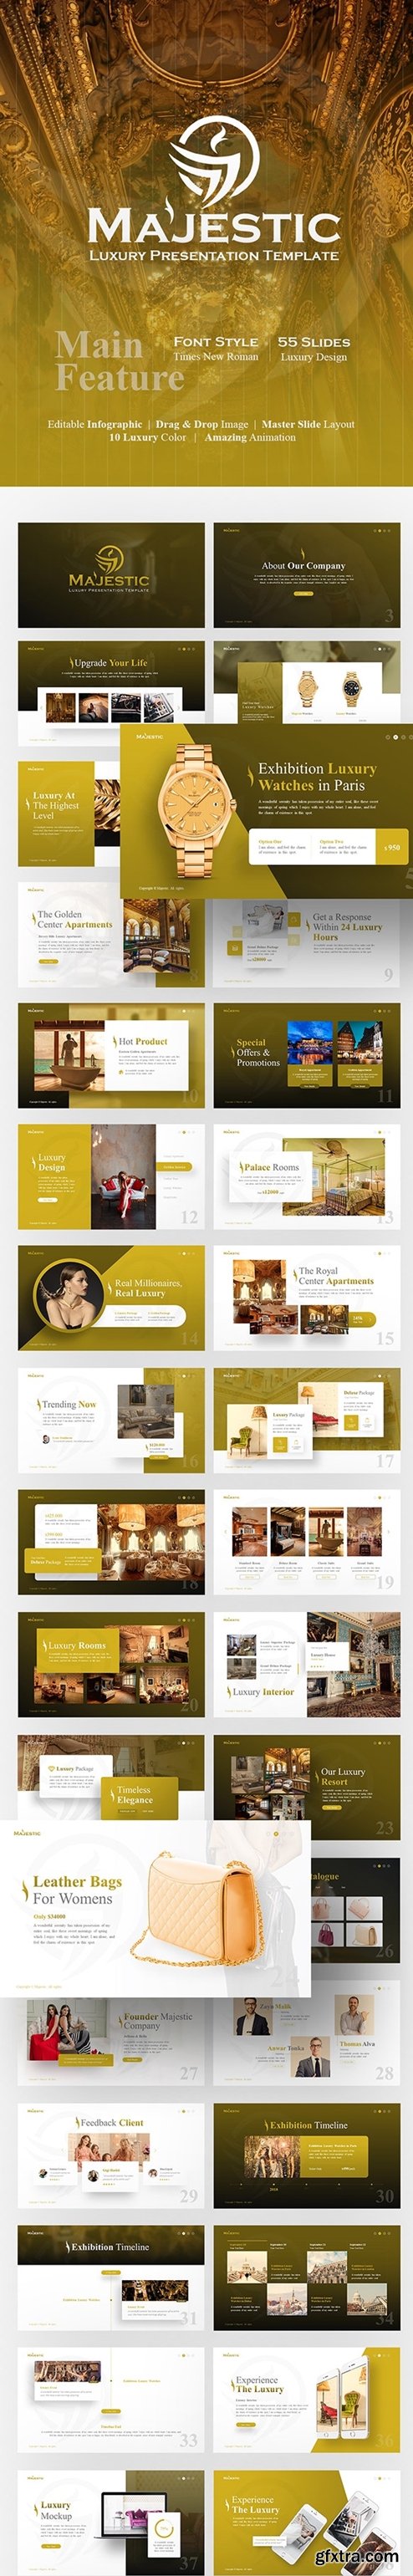 GraphicRiver - Majestic Luxury PowerPoint Template 23200807